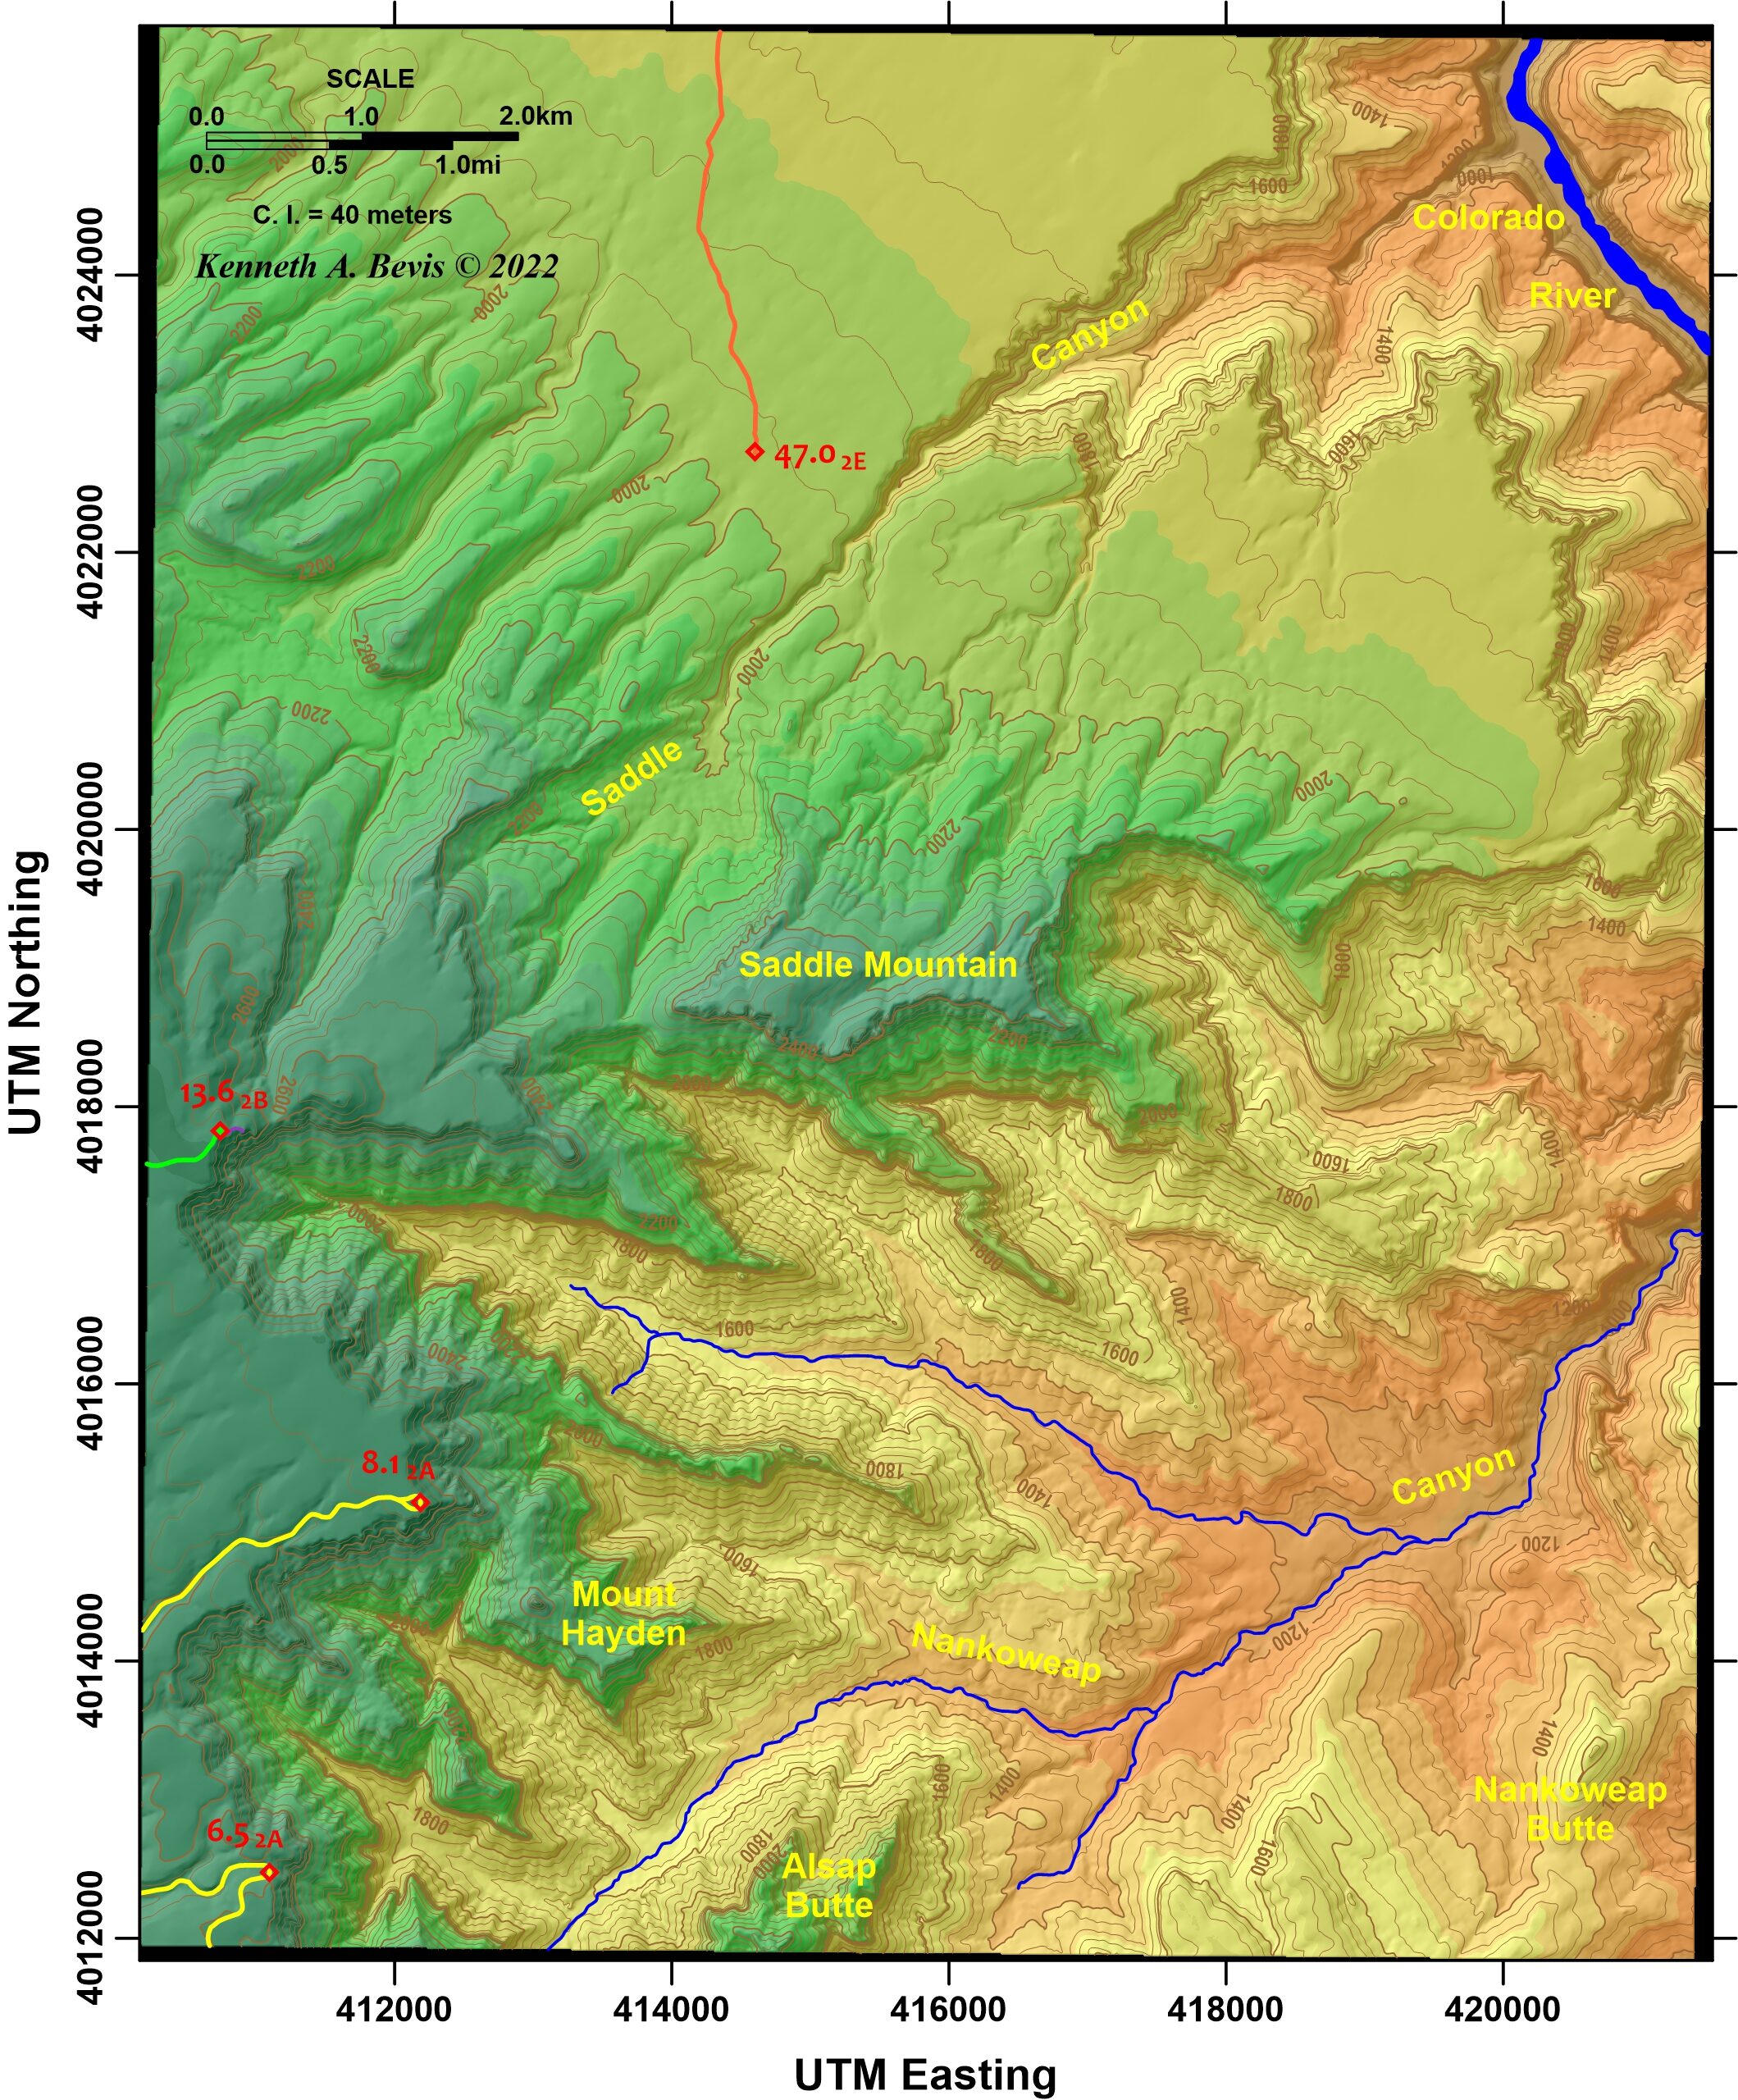 Color shaded-relief map of the Point Imperial, AZ 7.5-minute quadrangle showing segments of Field Trip 2A, 2B, and 2E.